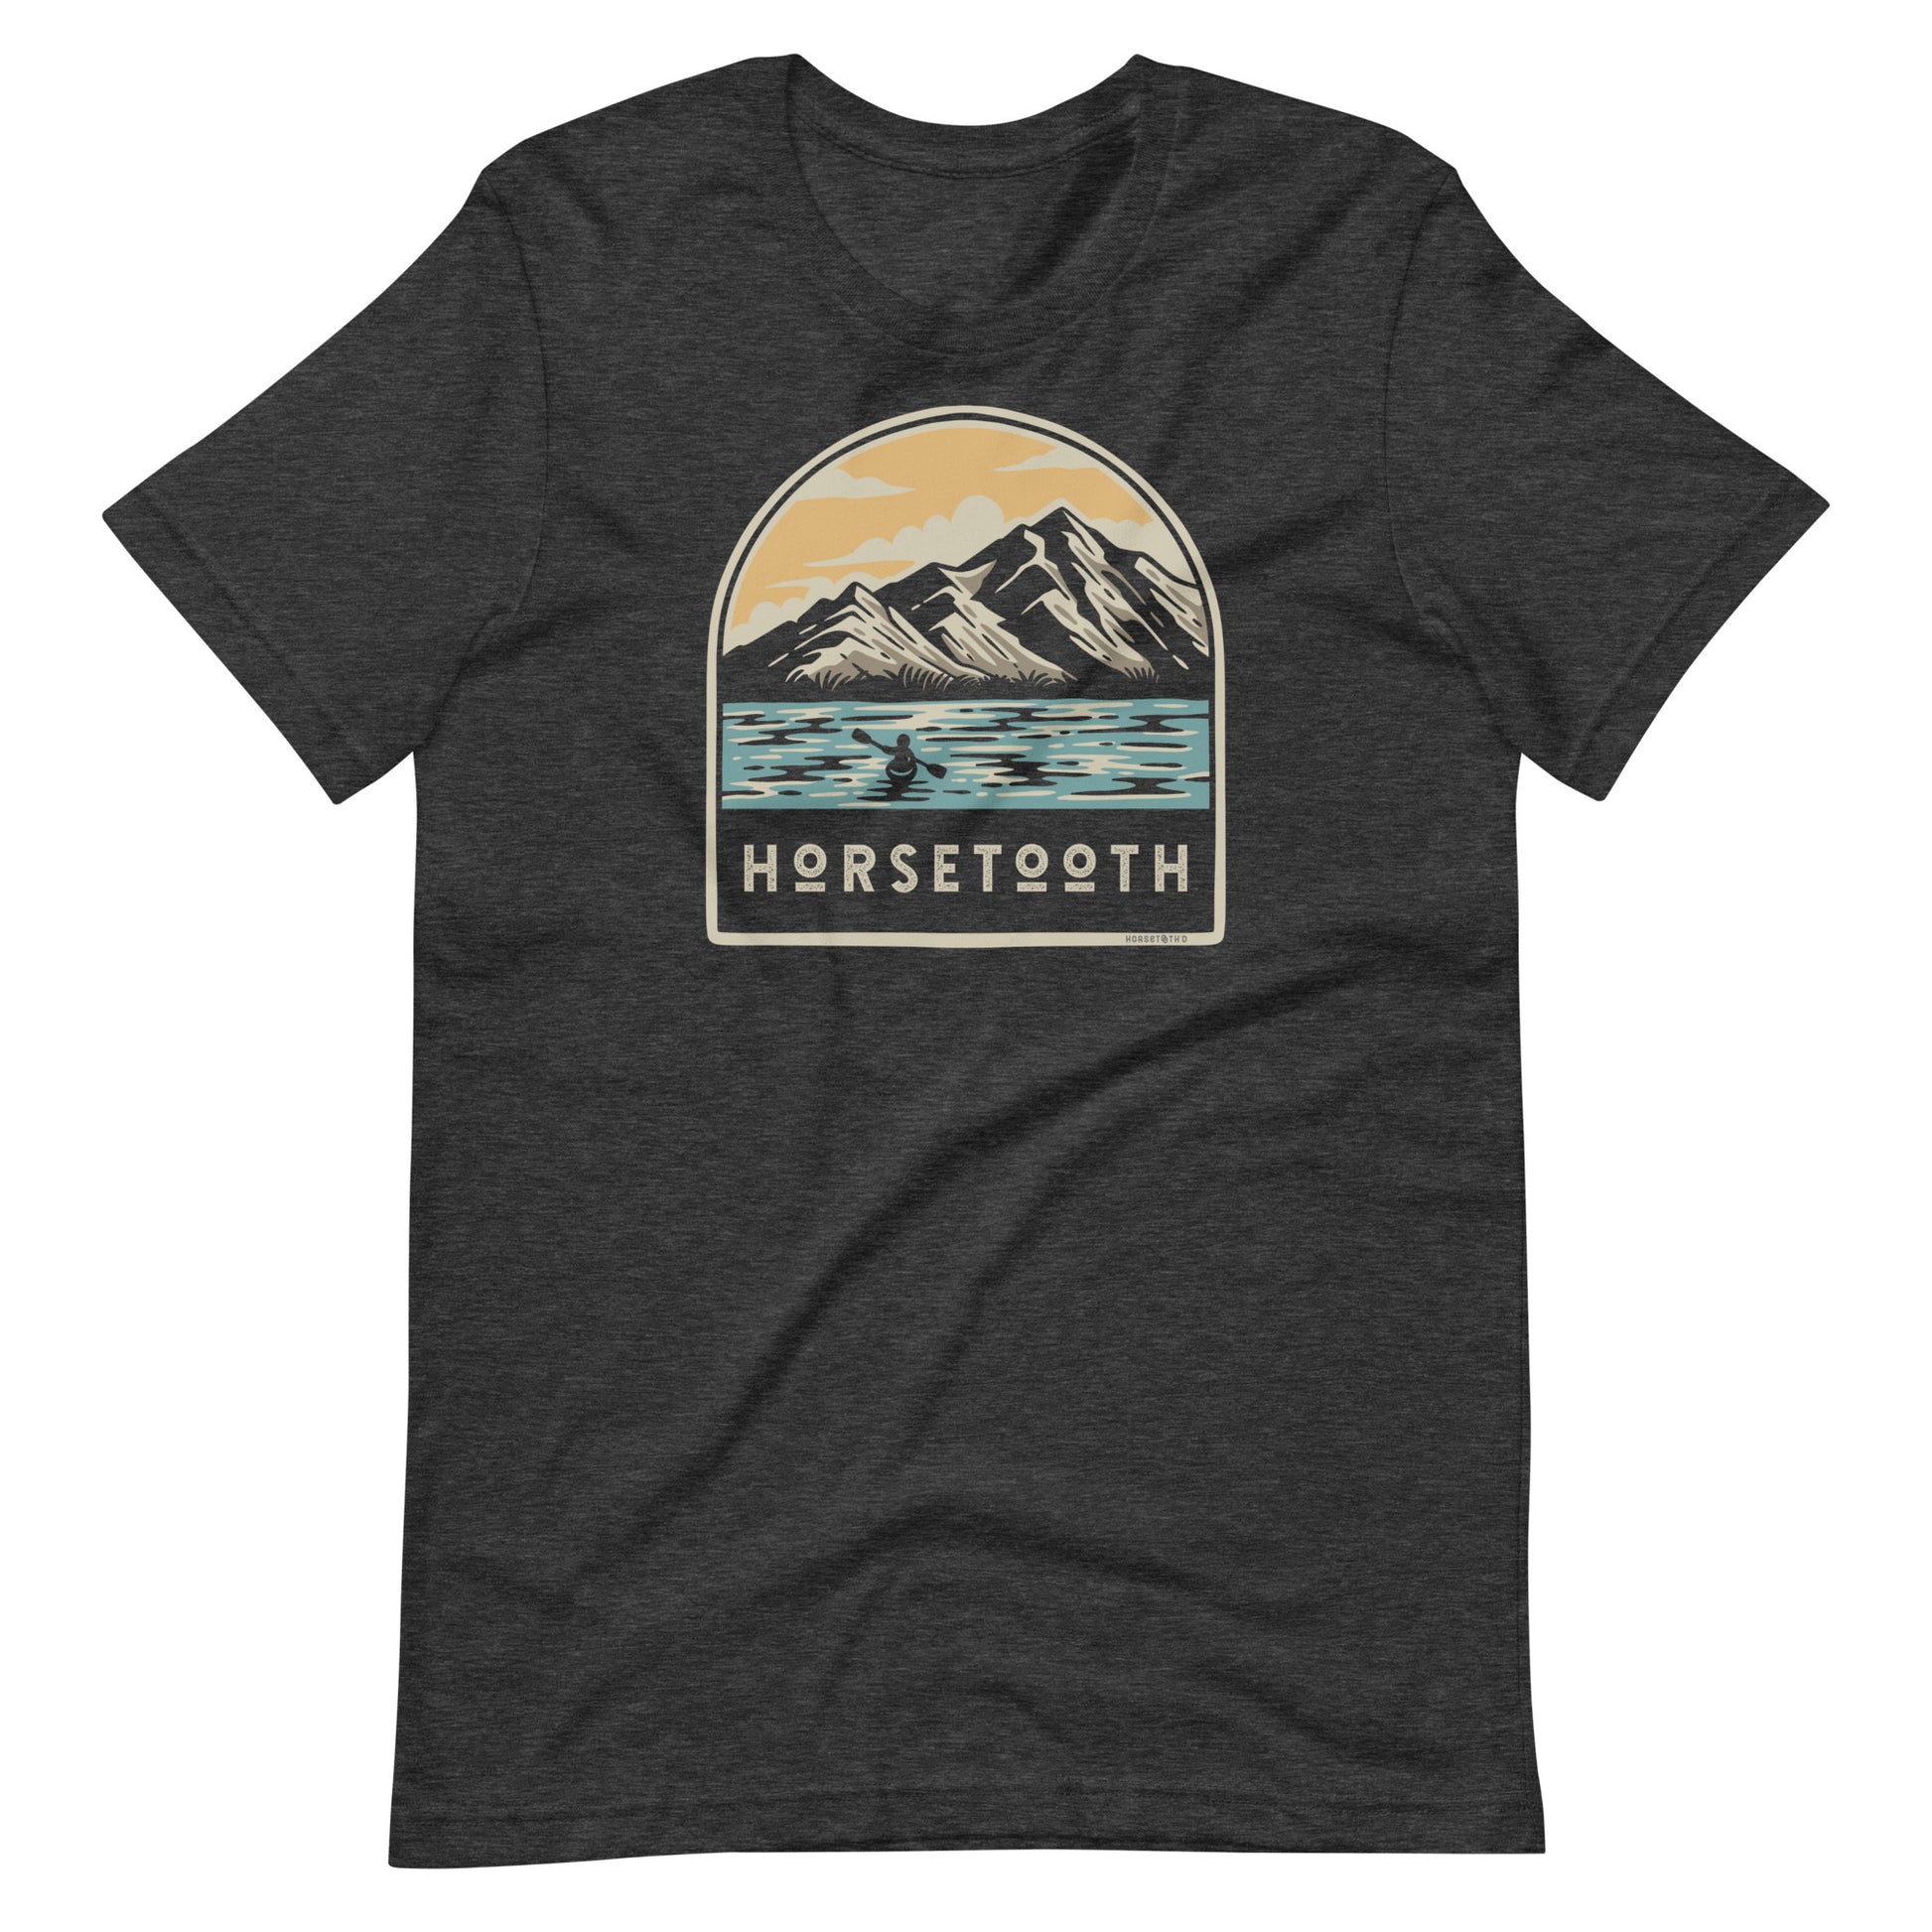 Athletic fit t-shirt by Horsetooth'd, featuring a unique design inspired by the thrill of kayaking on Horsetooth Reservoir.